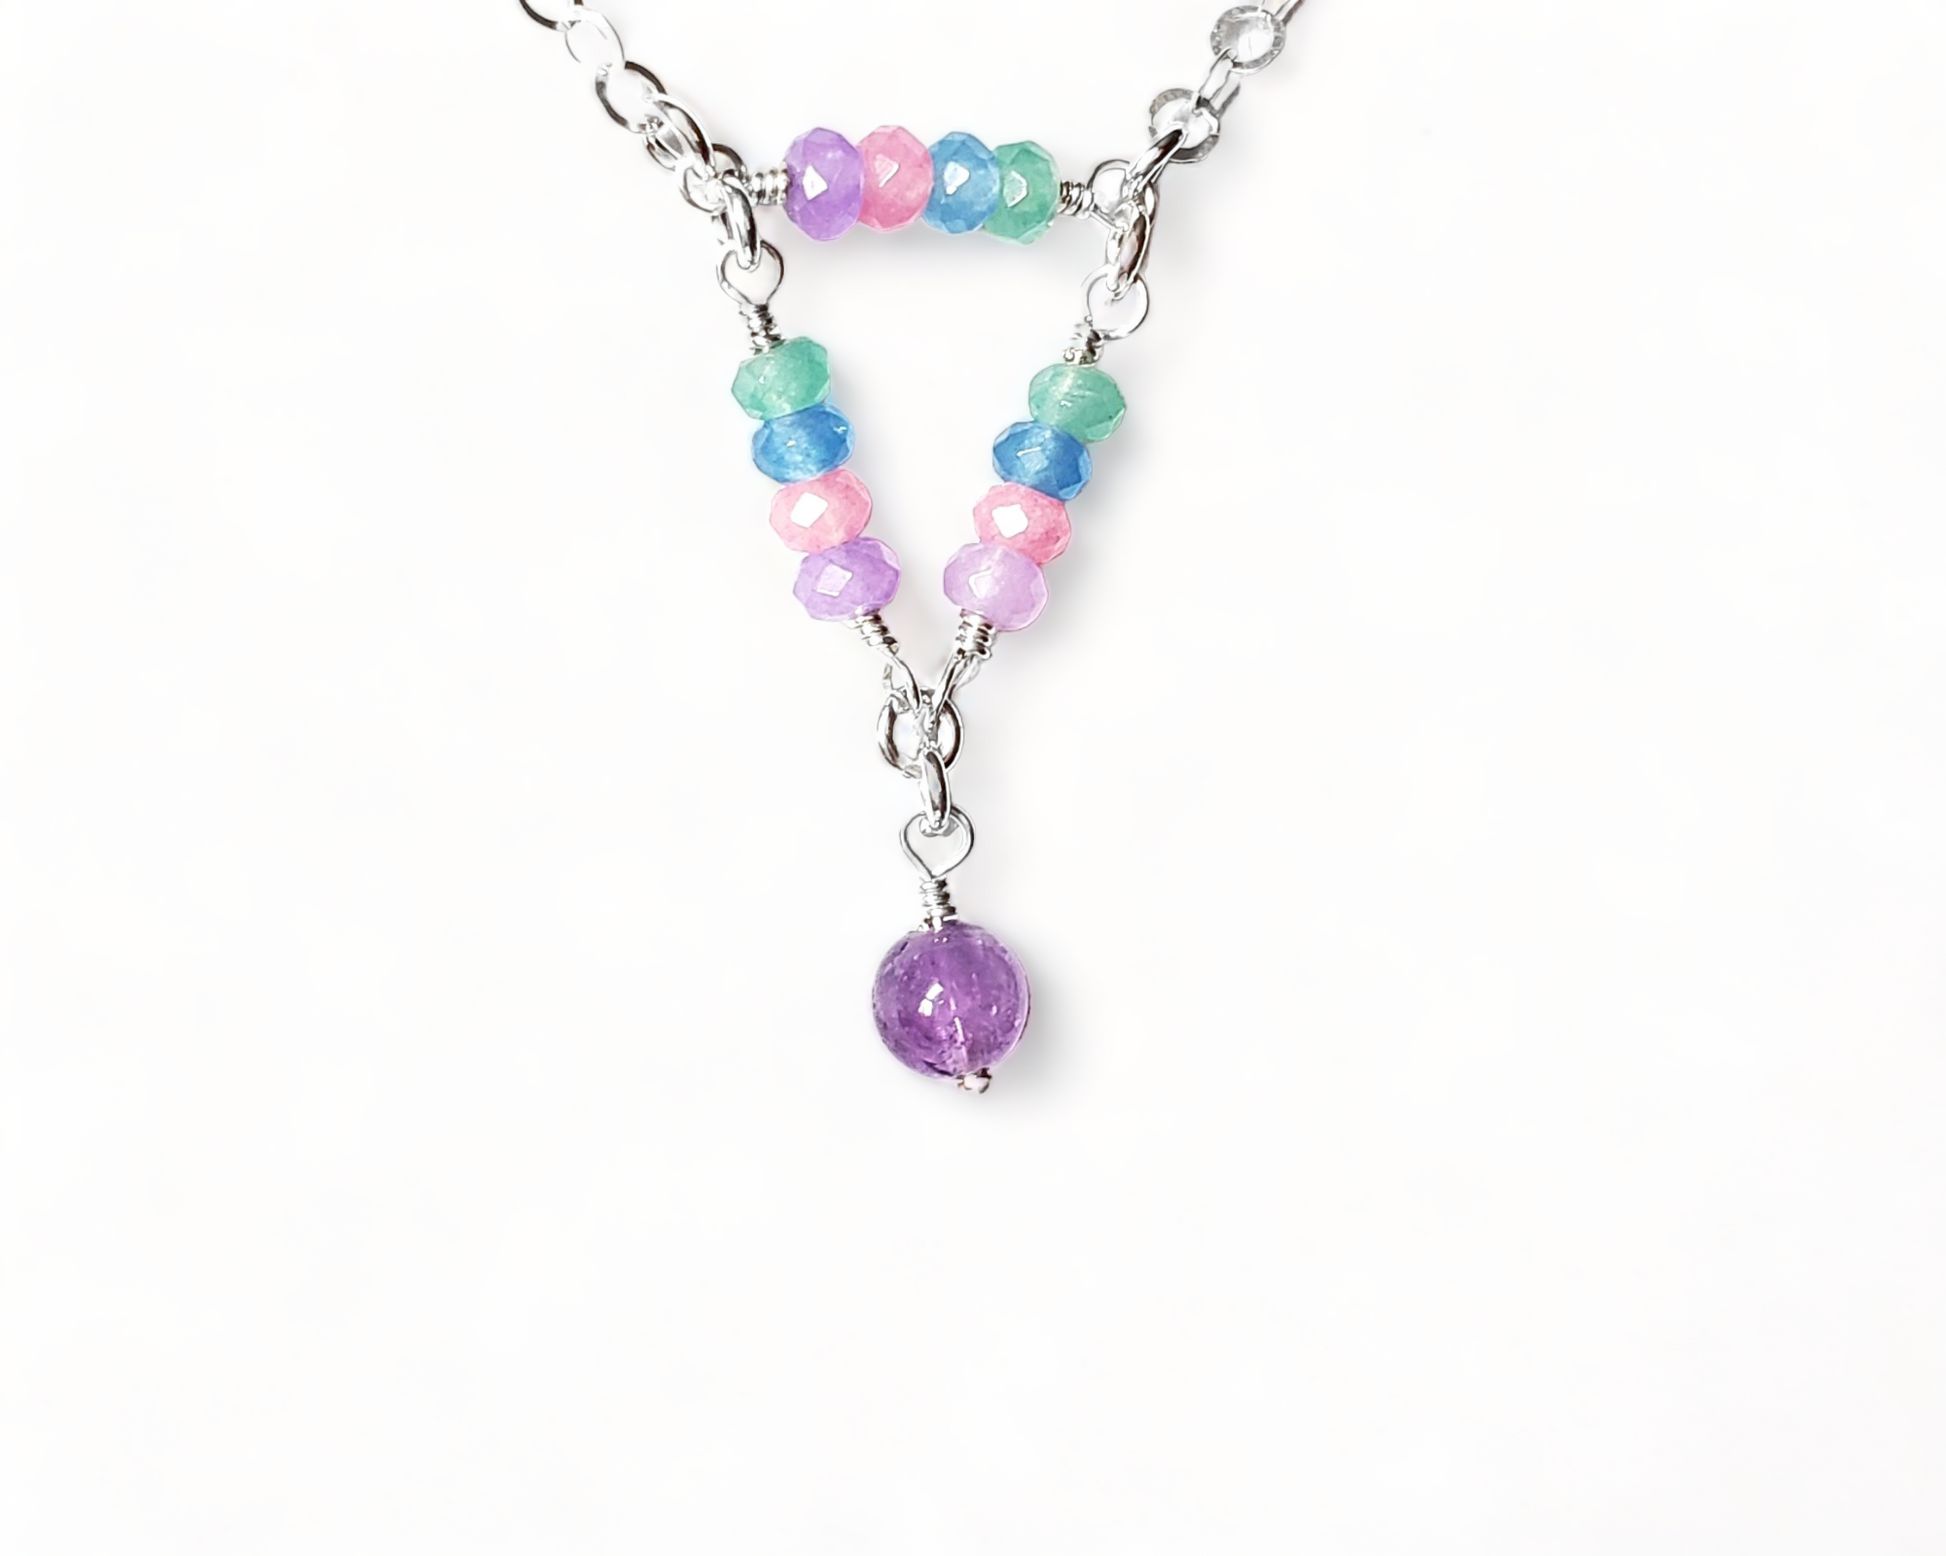 Today Tomorrow & Forever Amethyst Quartz Multicolour Necklace, Pink, Blue, Purple, Green, Triangle 